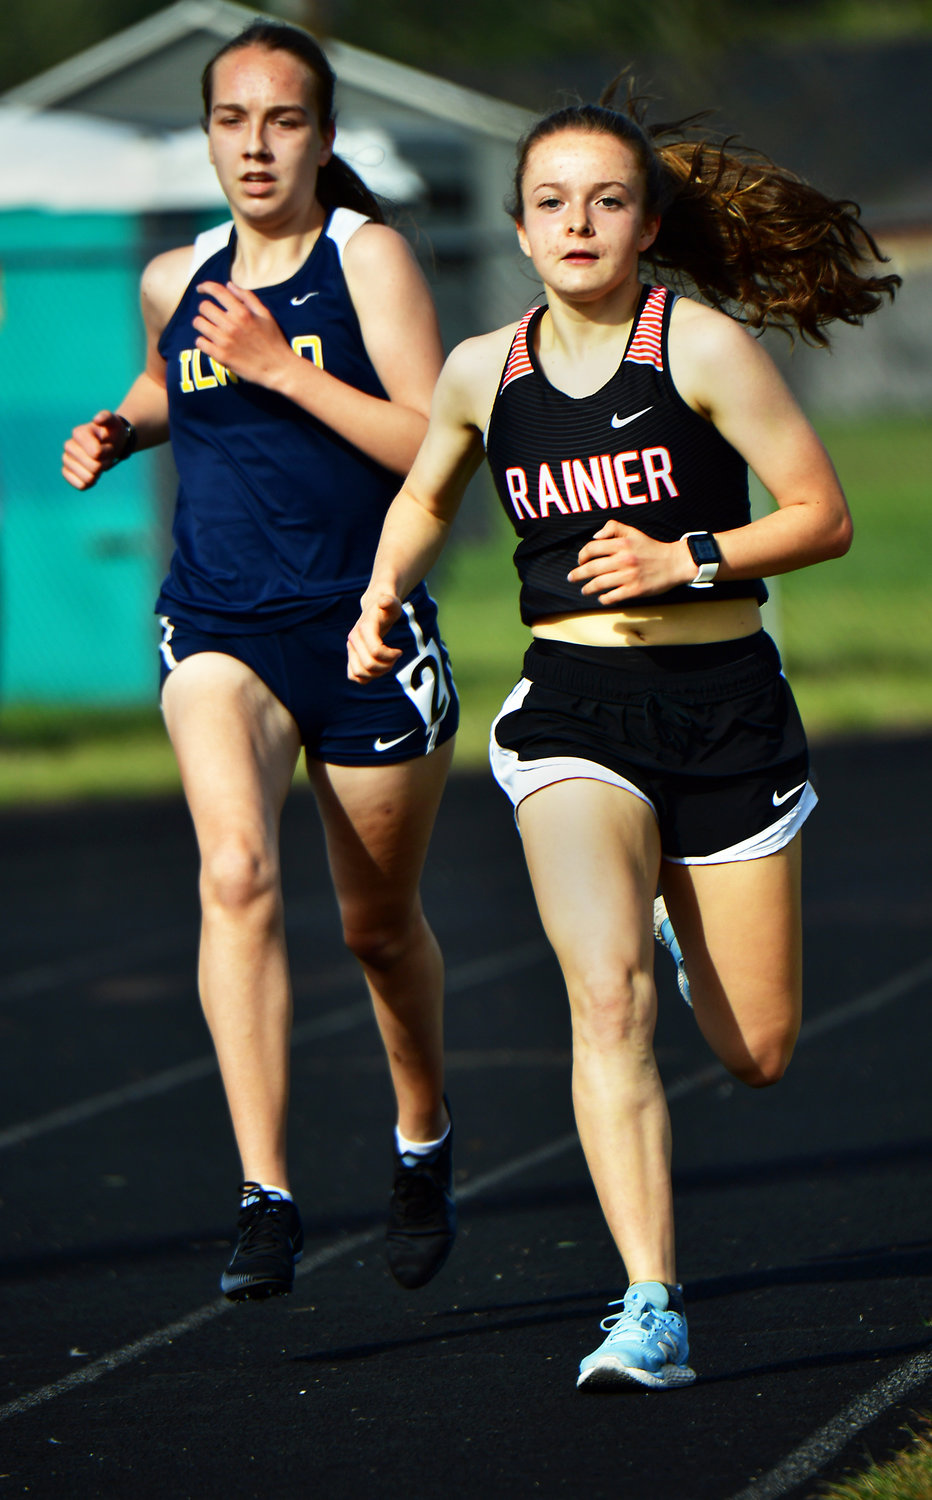 Rainier High School’s Selena Niemi, right, goes on to win the 1,600-meter run on Thursday, April 29, during the WIAA District 4 Track & Field Championships at Rainier High School.